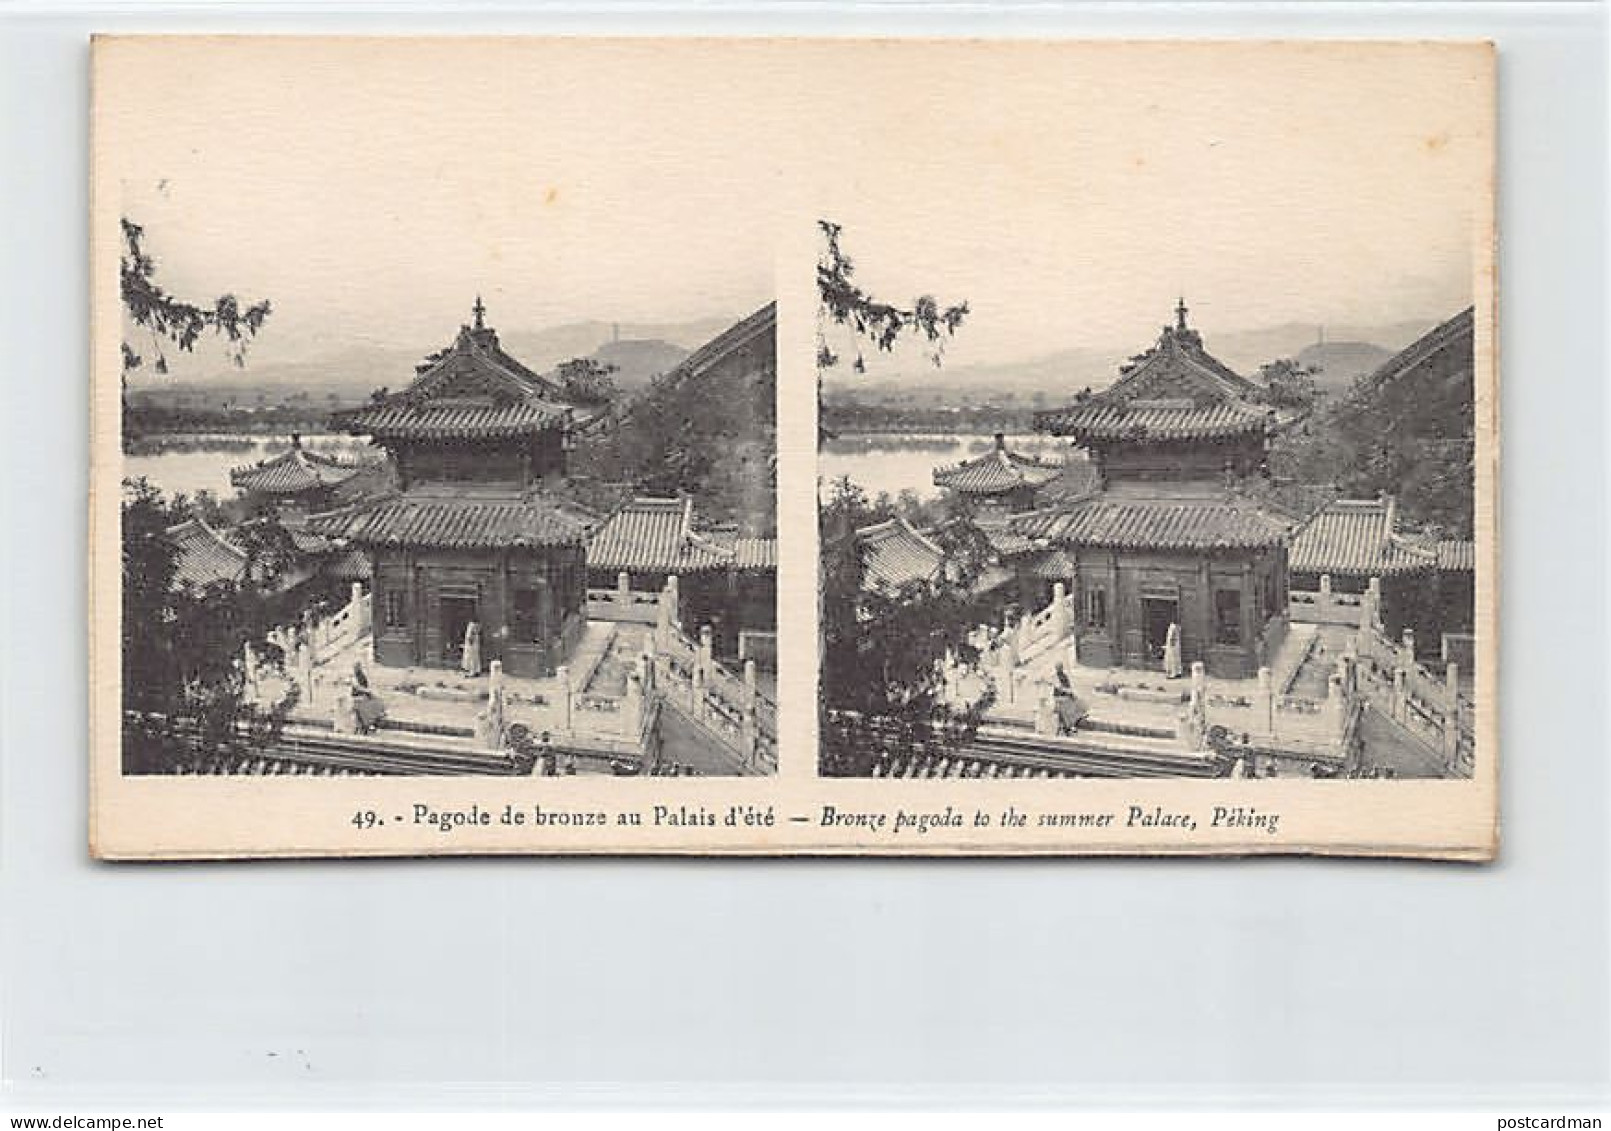 China - BEIJING - Bronze Pagoda Of The Summer Palace - LILIPUT POSTCARD - Publ. Unknown 49 - China